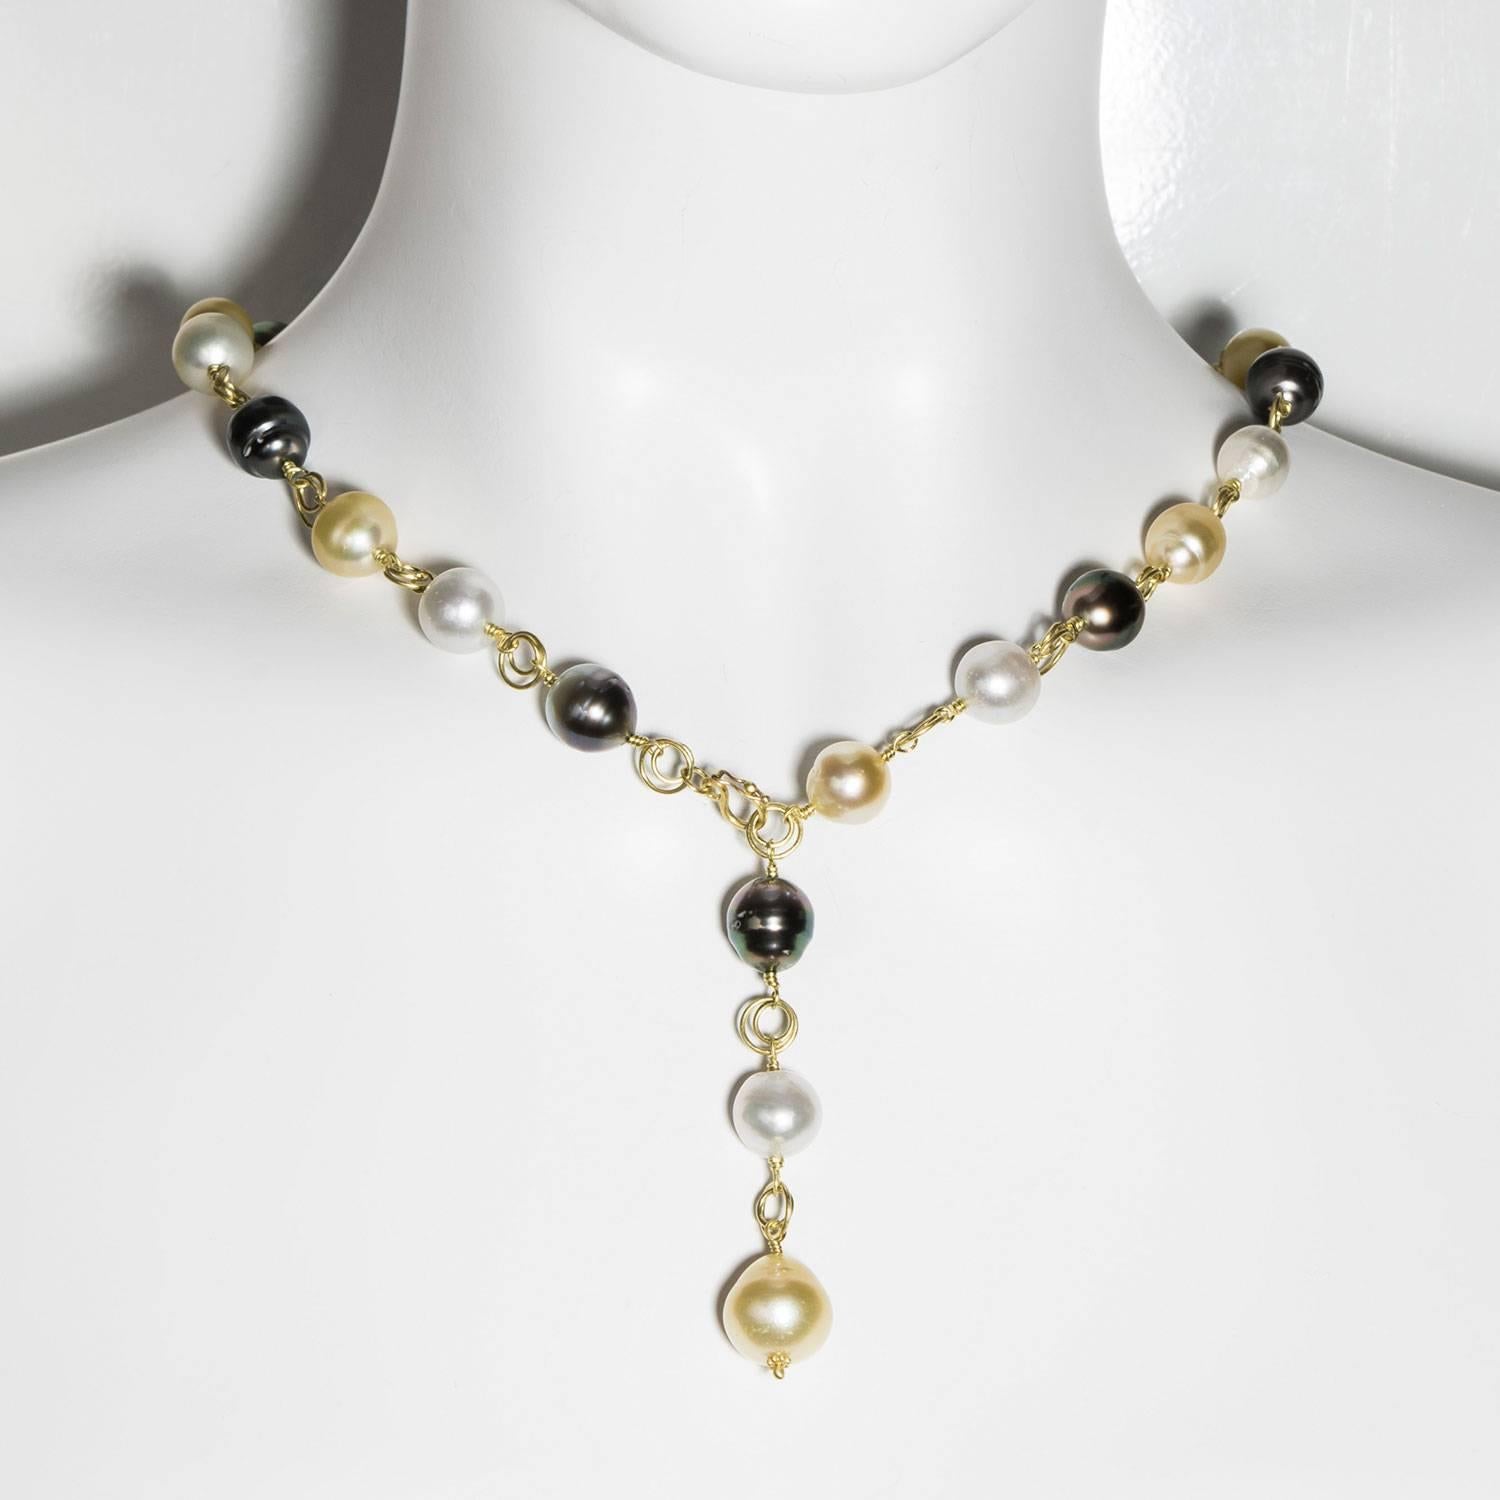 18k green* gold multicolored white, golden South Sea and black Tahitian baroque cultured pearl chain necklace.  Hand wrapped in alternating colors interspersed with gold links to give it lightness.  

10mm - 12mm    23